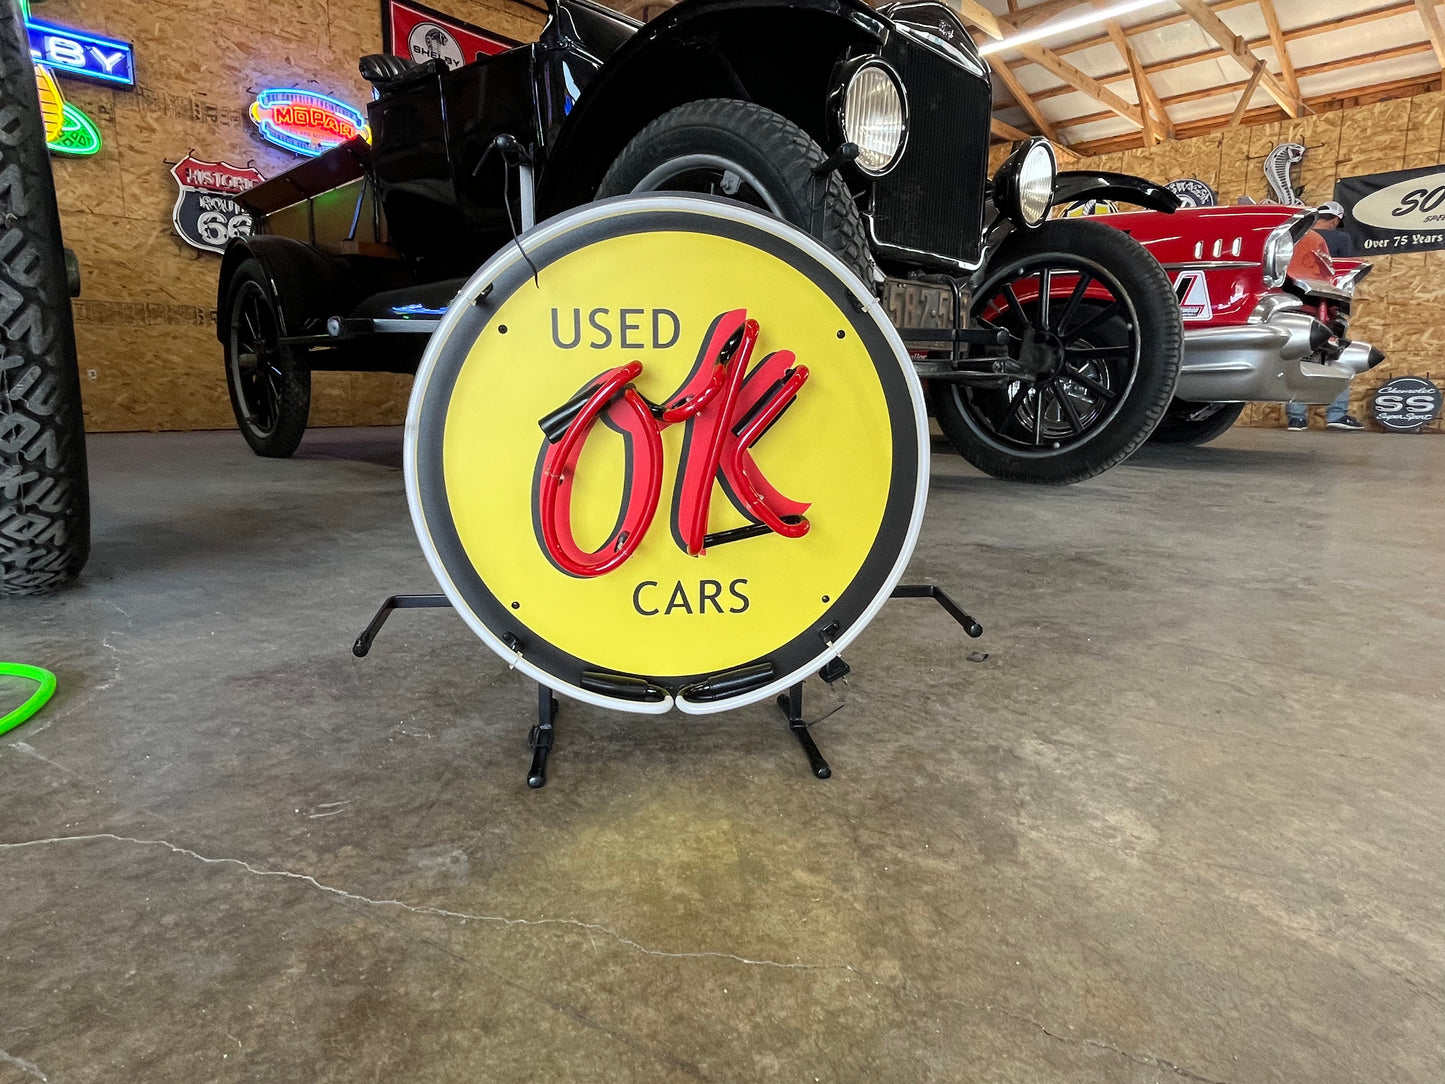 OK used car neon sign